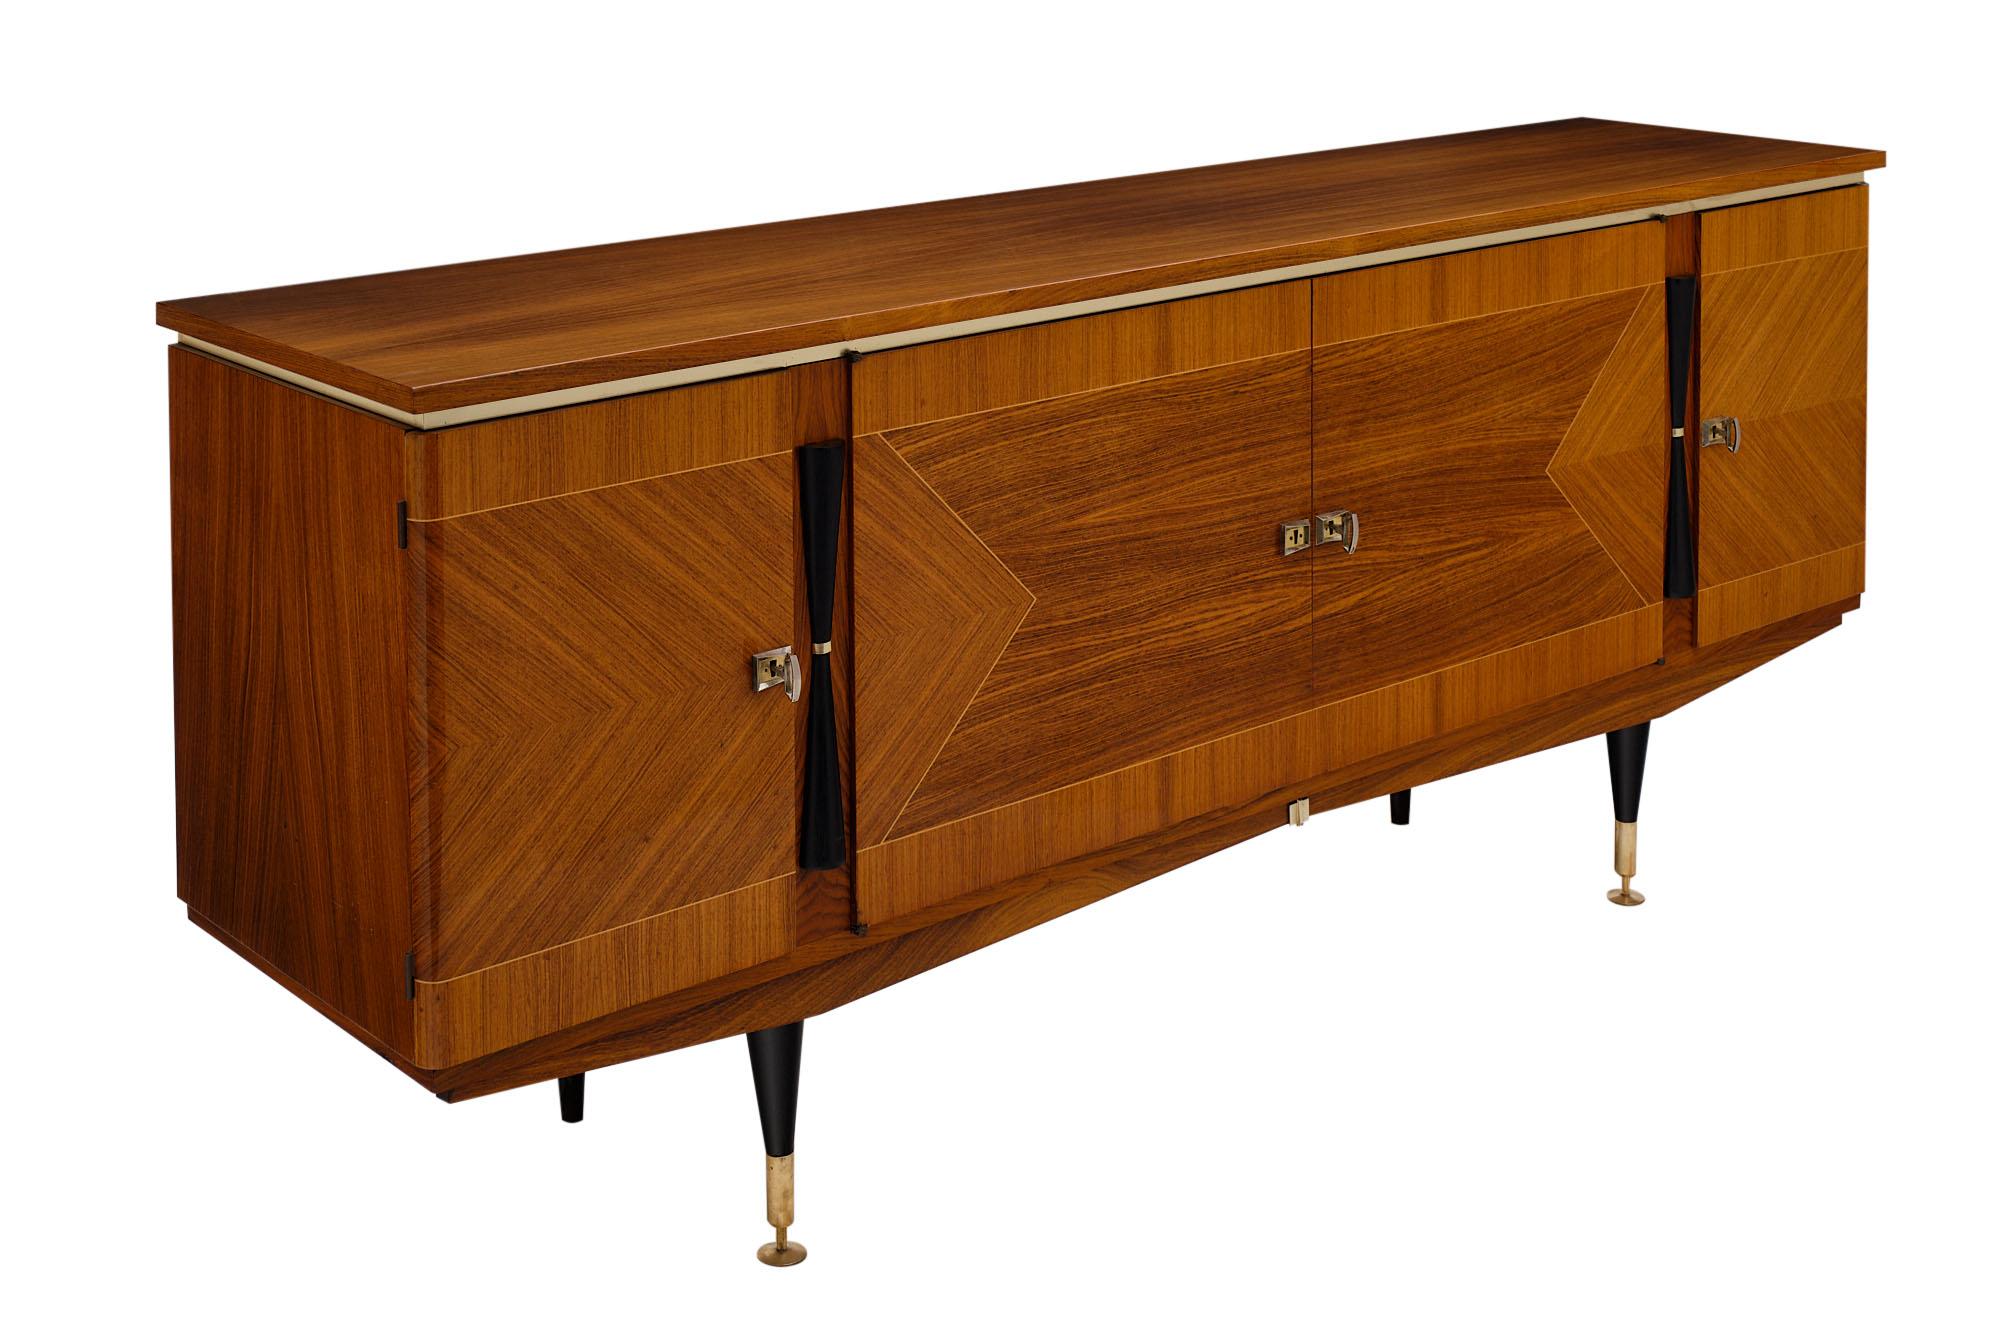 Buffet from France made of rosewood with parquetry and ebonized rosewood tapered legs with gilt brass feet. The four doors are working with locks and keys and open up to a lavish interior featuring ample storage with adjustable satinwood shelves and